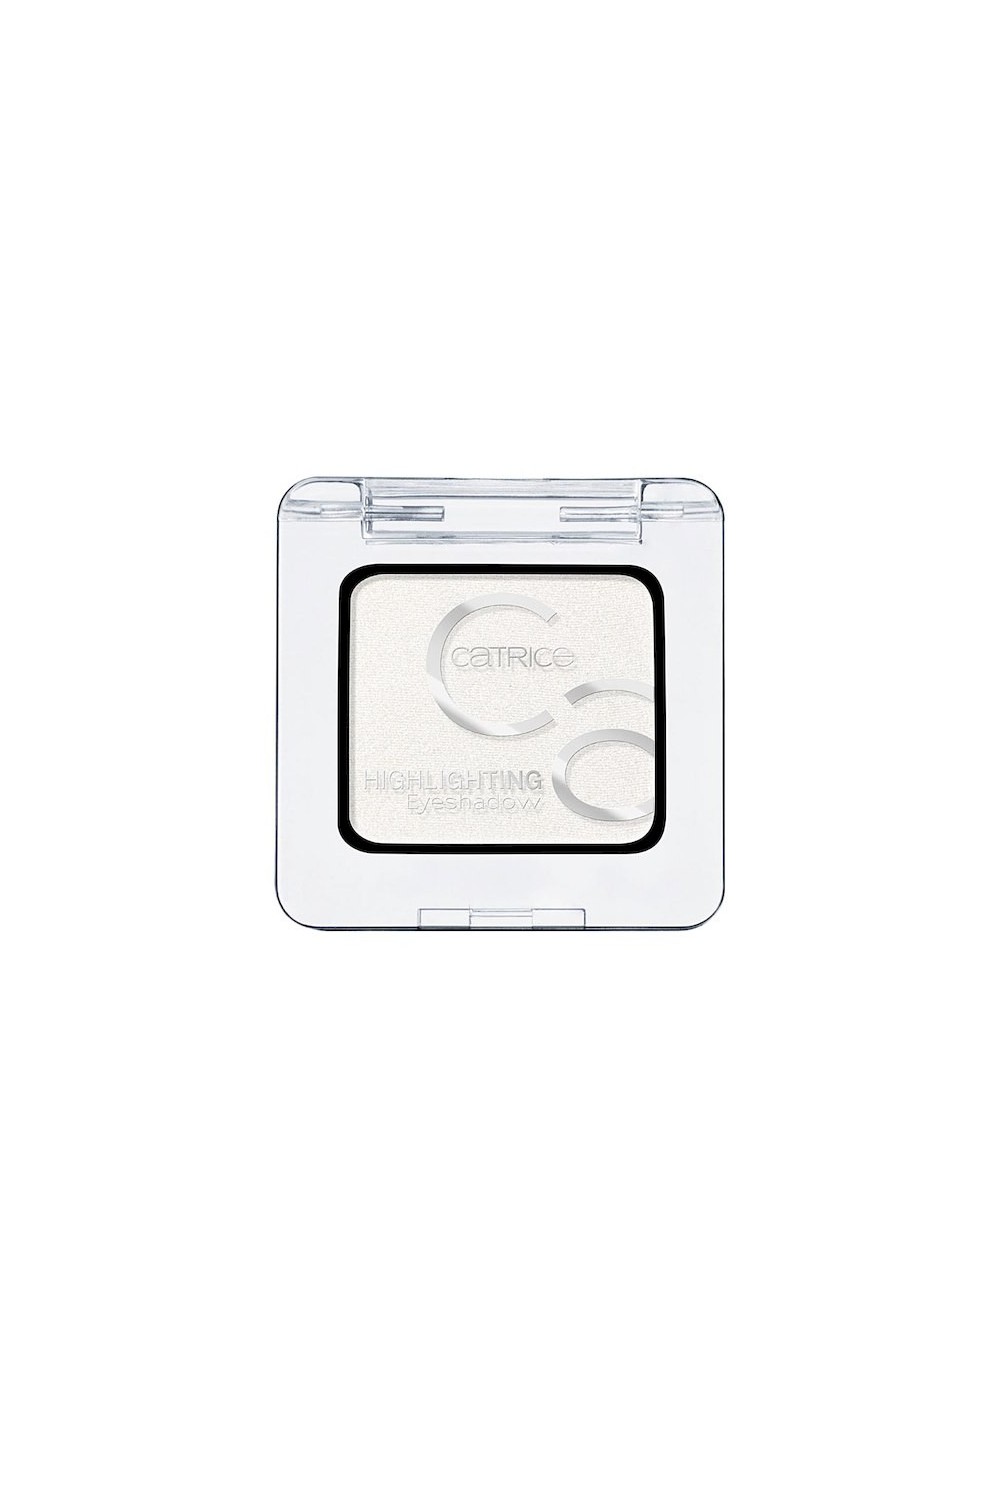 Catrice Highlighting Eyeshadow 010 Highlight To Hell